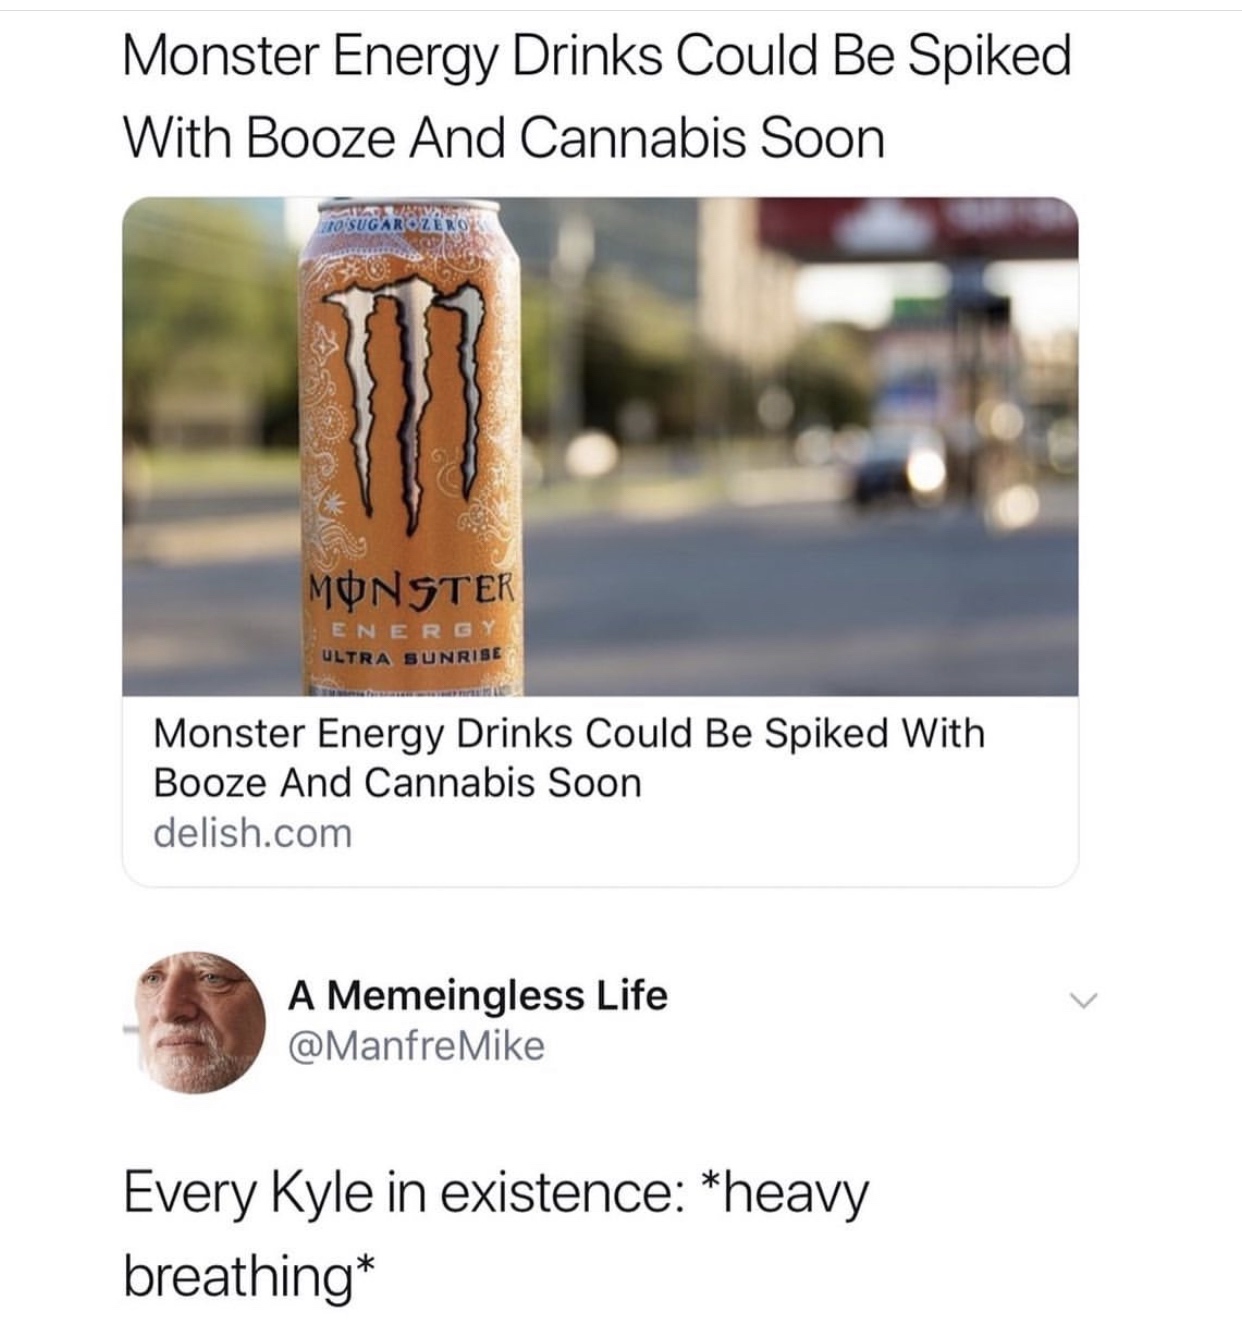 calm down kyle - Monster Energy Drinks Could Be Spiked With Booze And Cannabis Soon Toisugarozero Monster Energy Ultra Sunrise Monster Energy Drinks Could Be Spiked With Booze And Cannabis Soon delish.com A Memeingless Life Every Kyle in existence heavy b